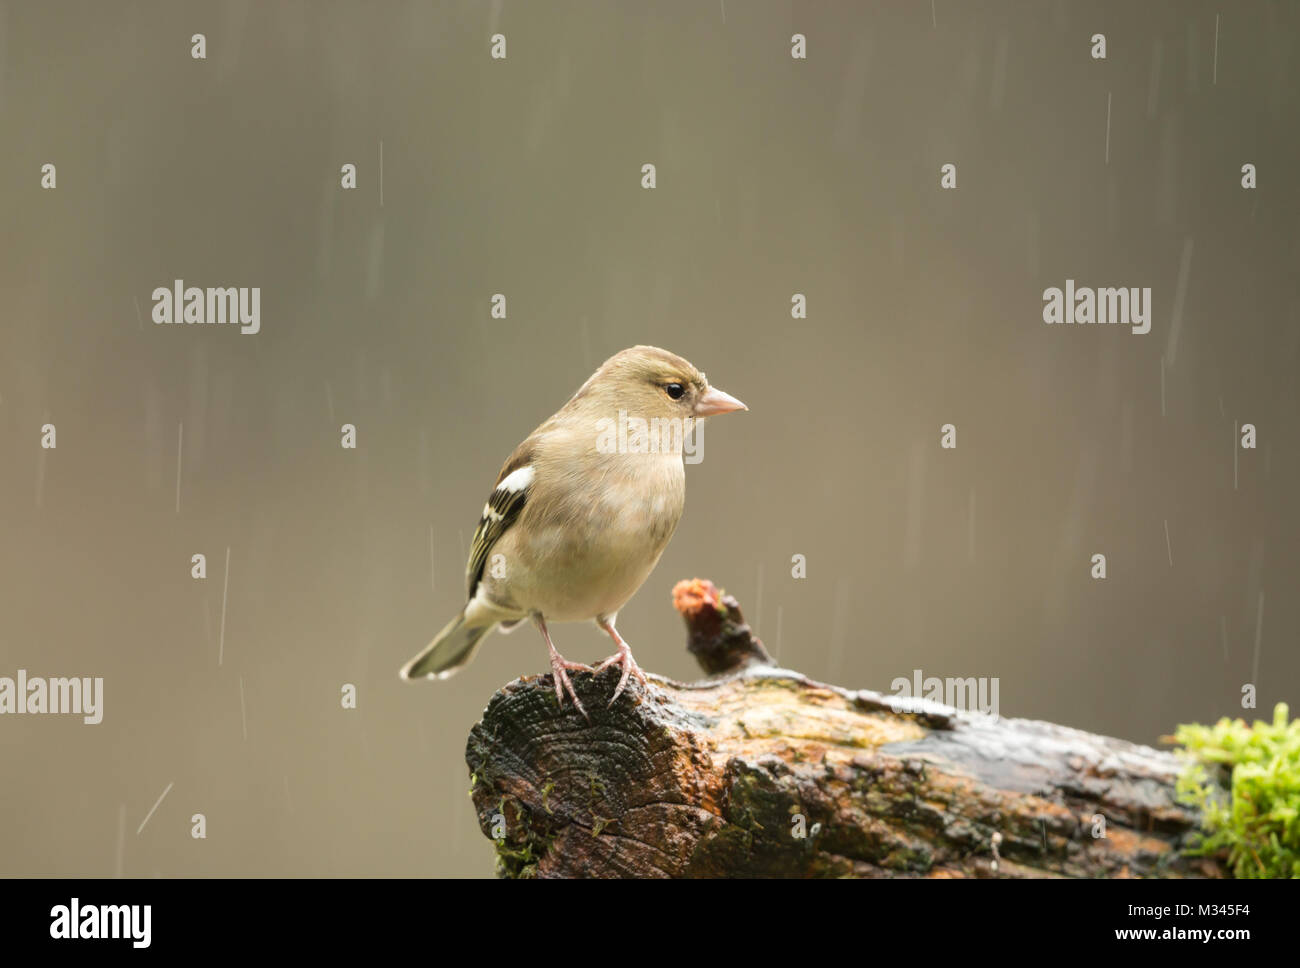 Female Chaffinch perching on a log in the rain with blurred background, landscape Stock Photo